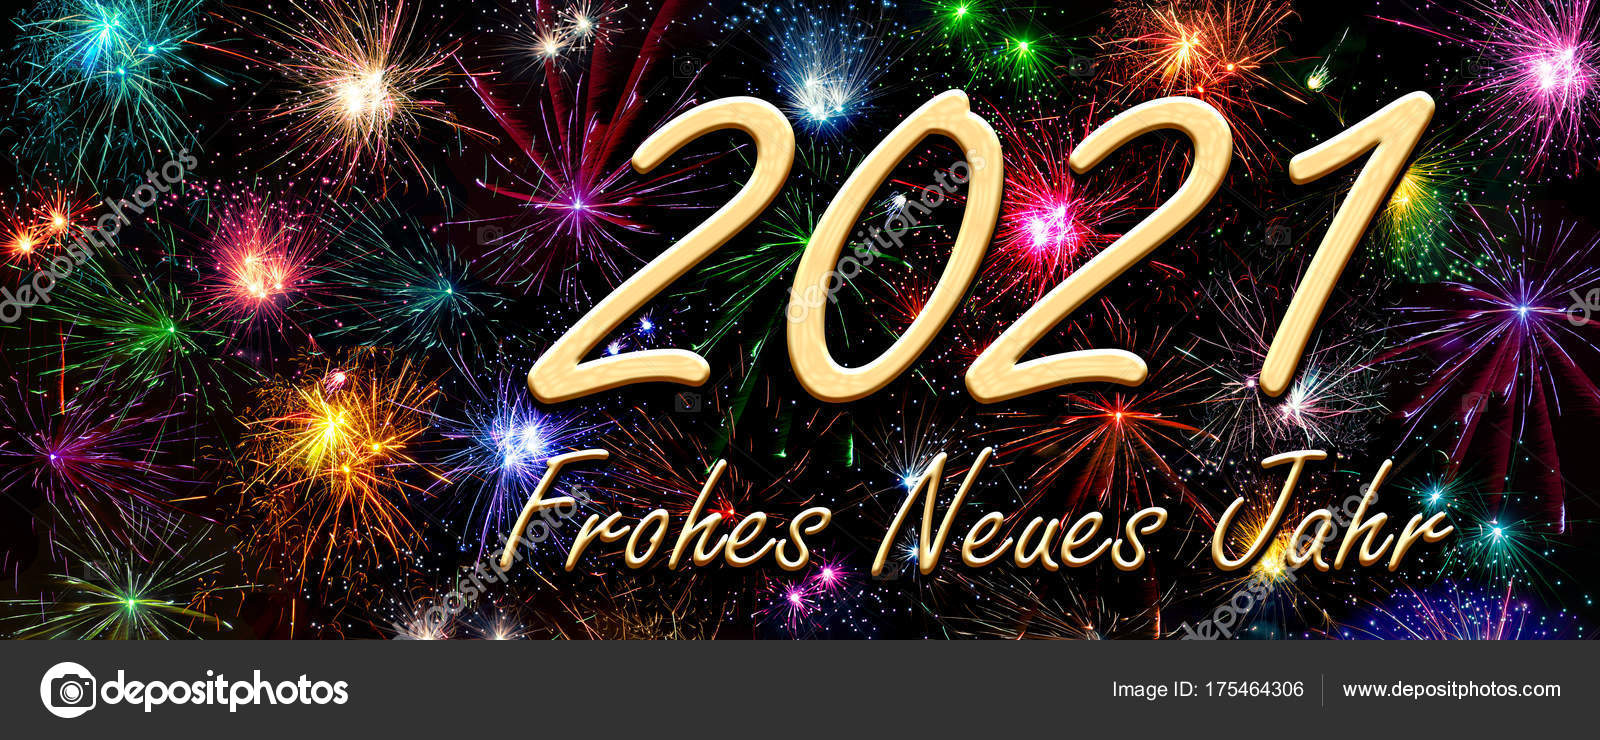 Images Happy New Year 2021 German Wish Happy New Year 2021